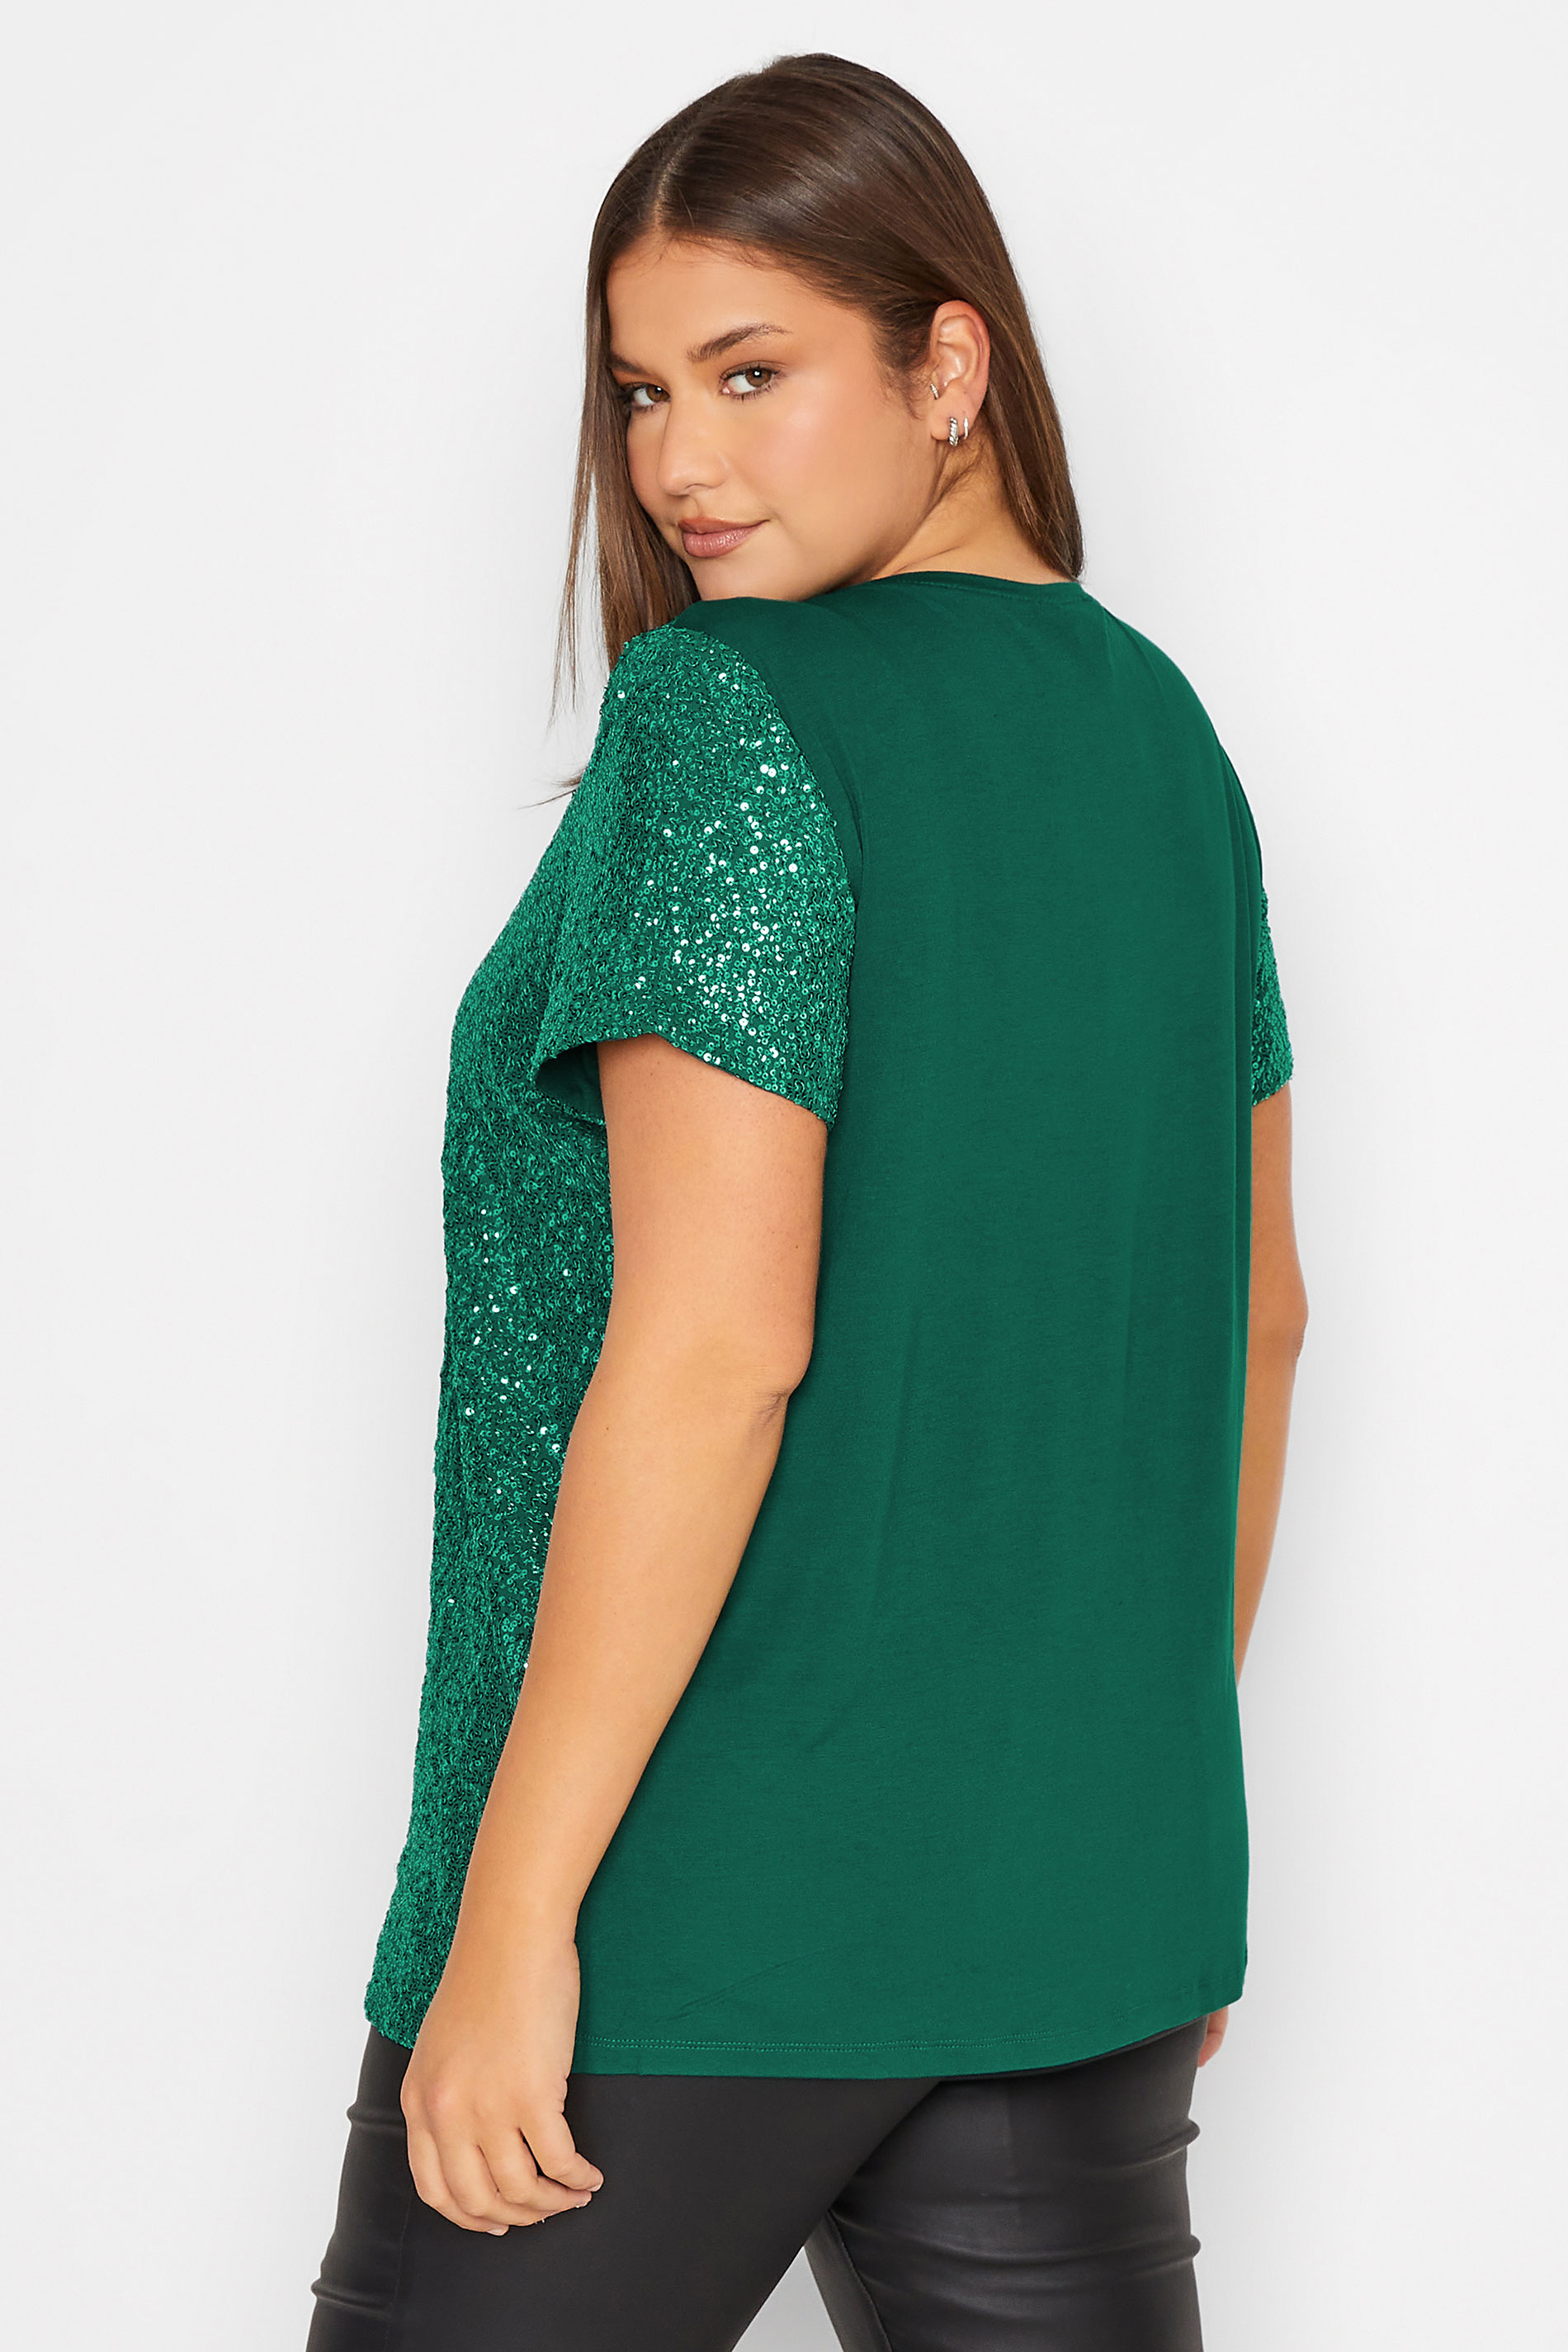 LTS Tall Emerald Green Sequin Embellished Boxy T-Shirt | Long Tall Sally 3